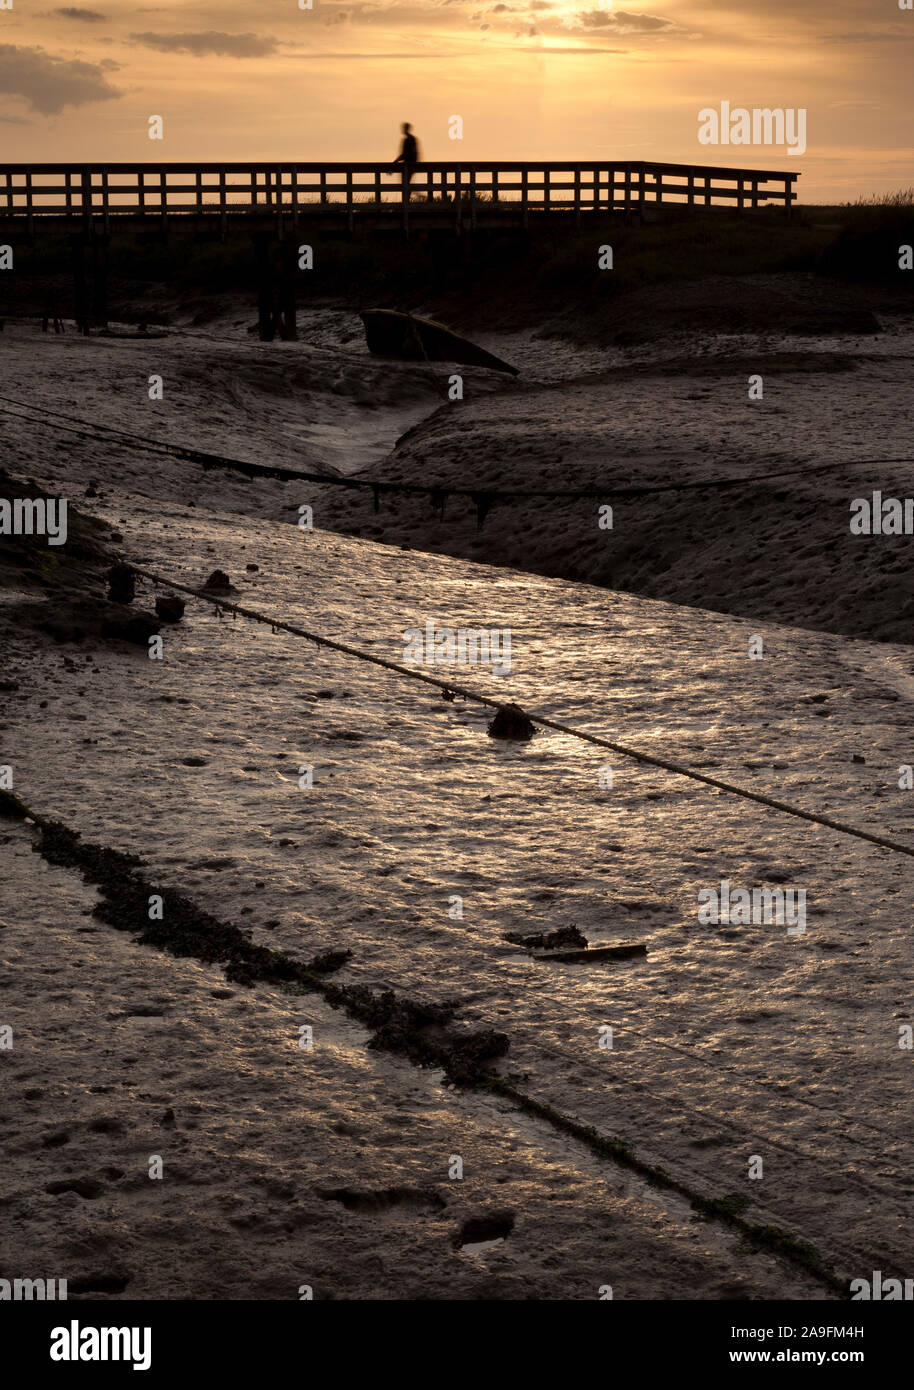 Moody image of Salt Marsh mud at low tide with a shadowy figure walking over a footbridge Stock Photo